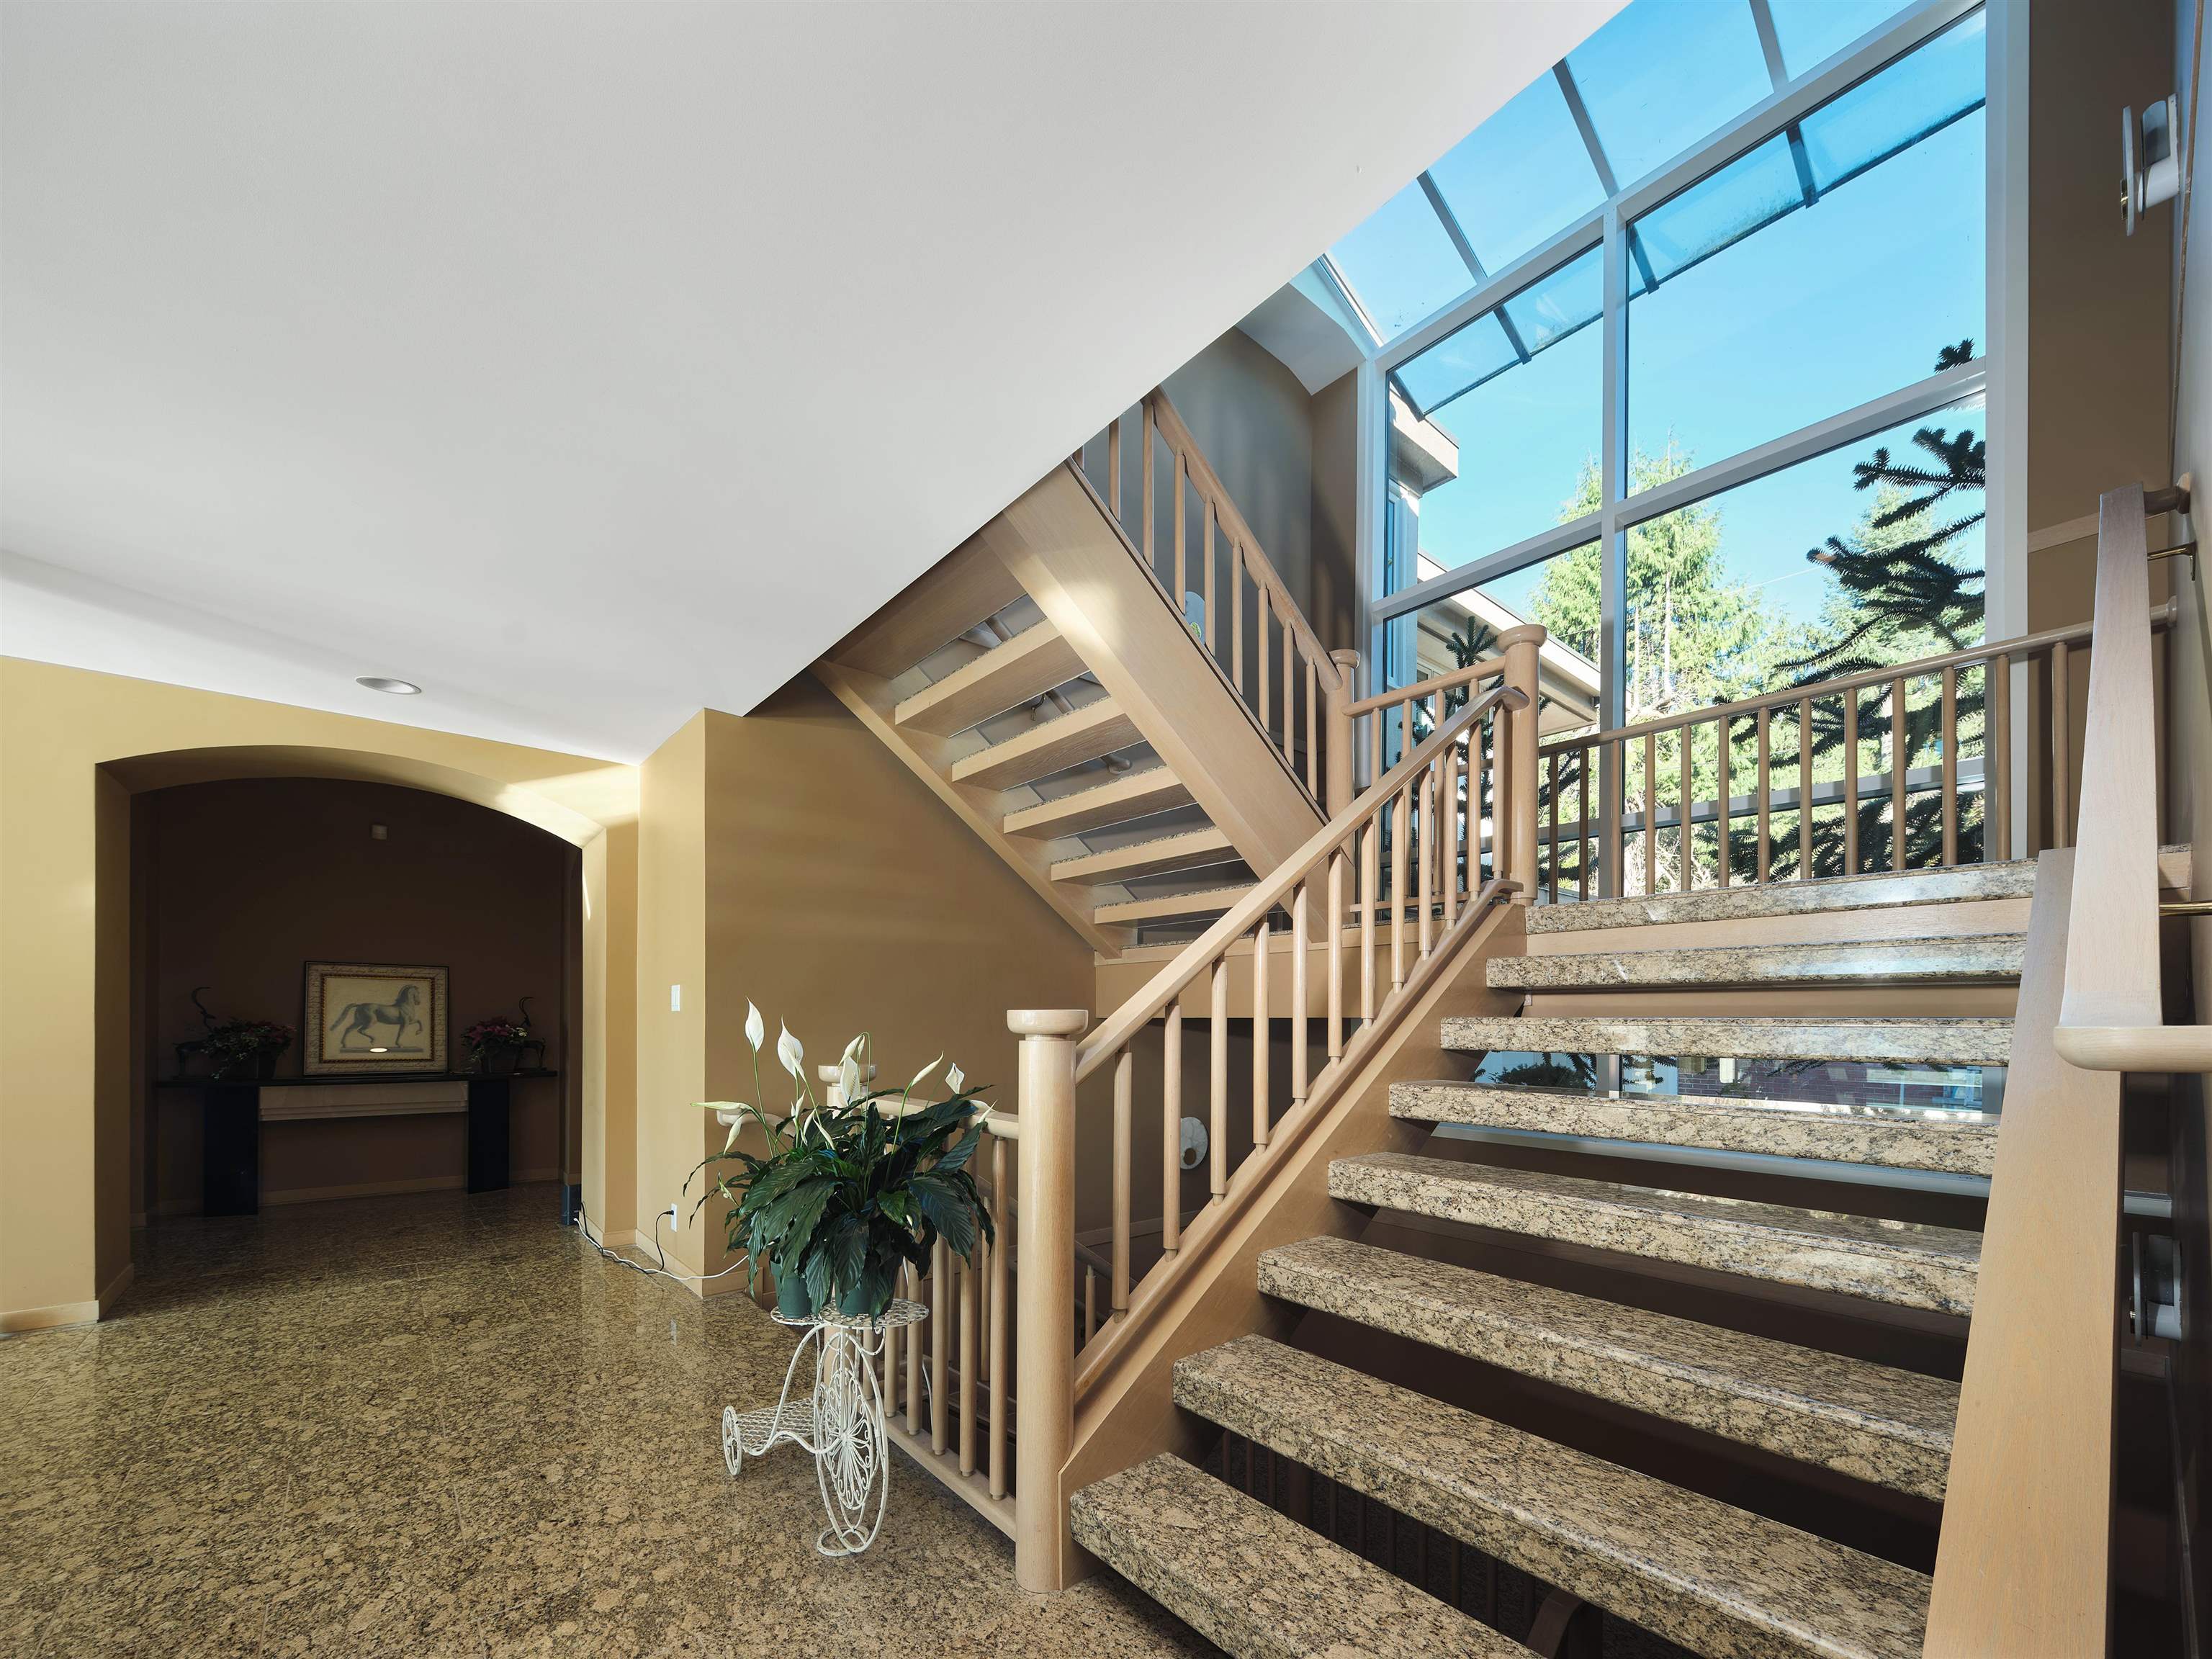 Listing image of 1025 KING GEORGES WAY